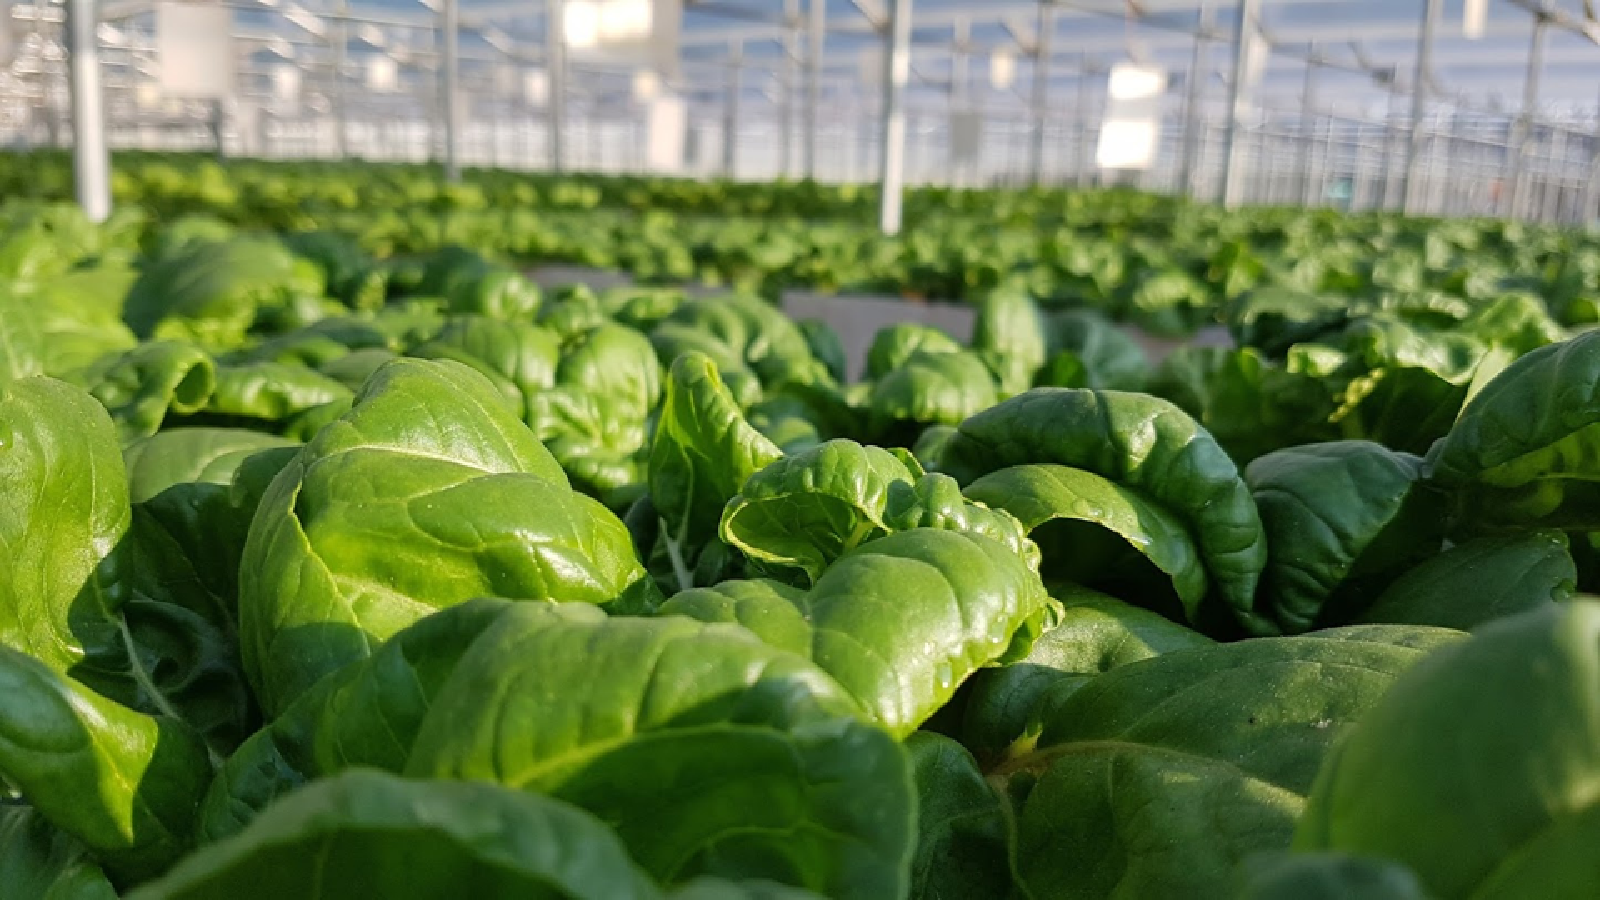 What goes into high-tech vegetable farming? Image